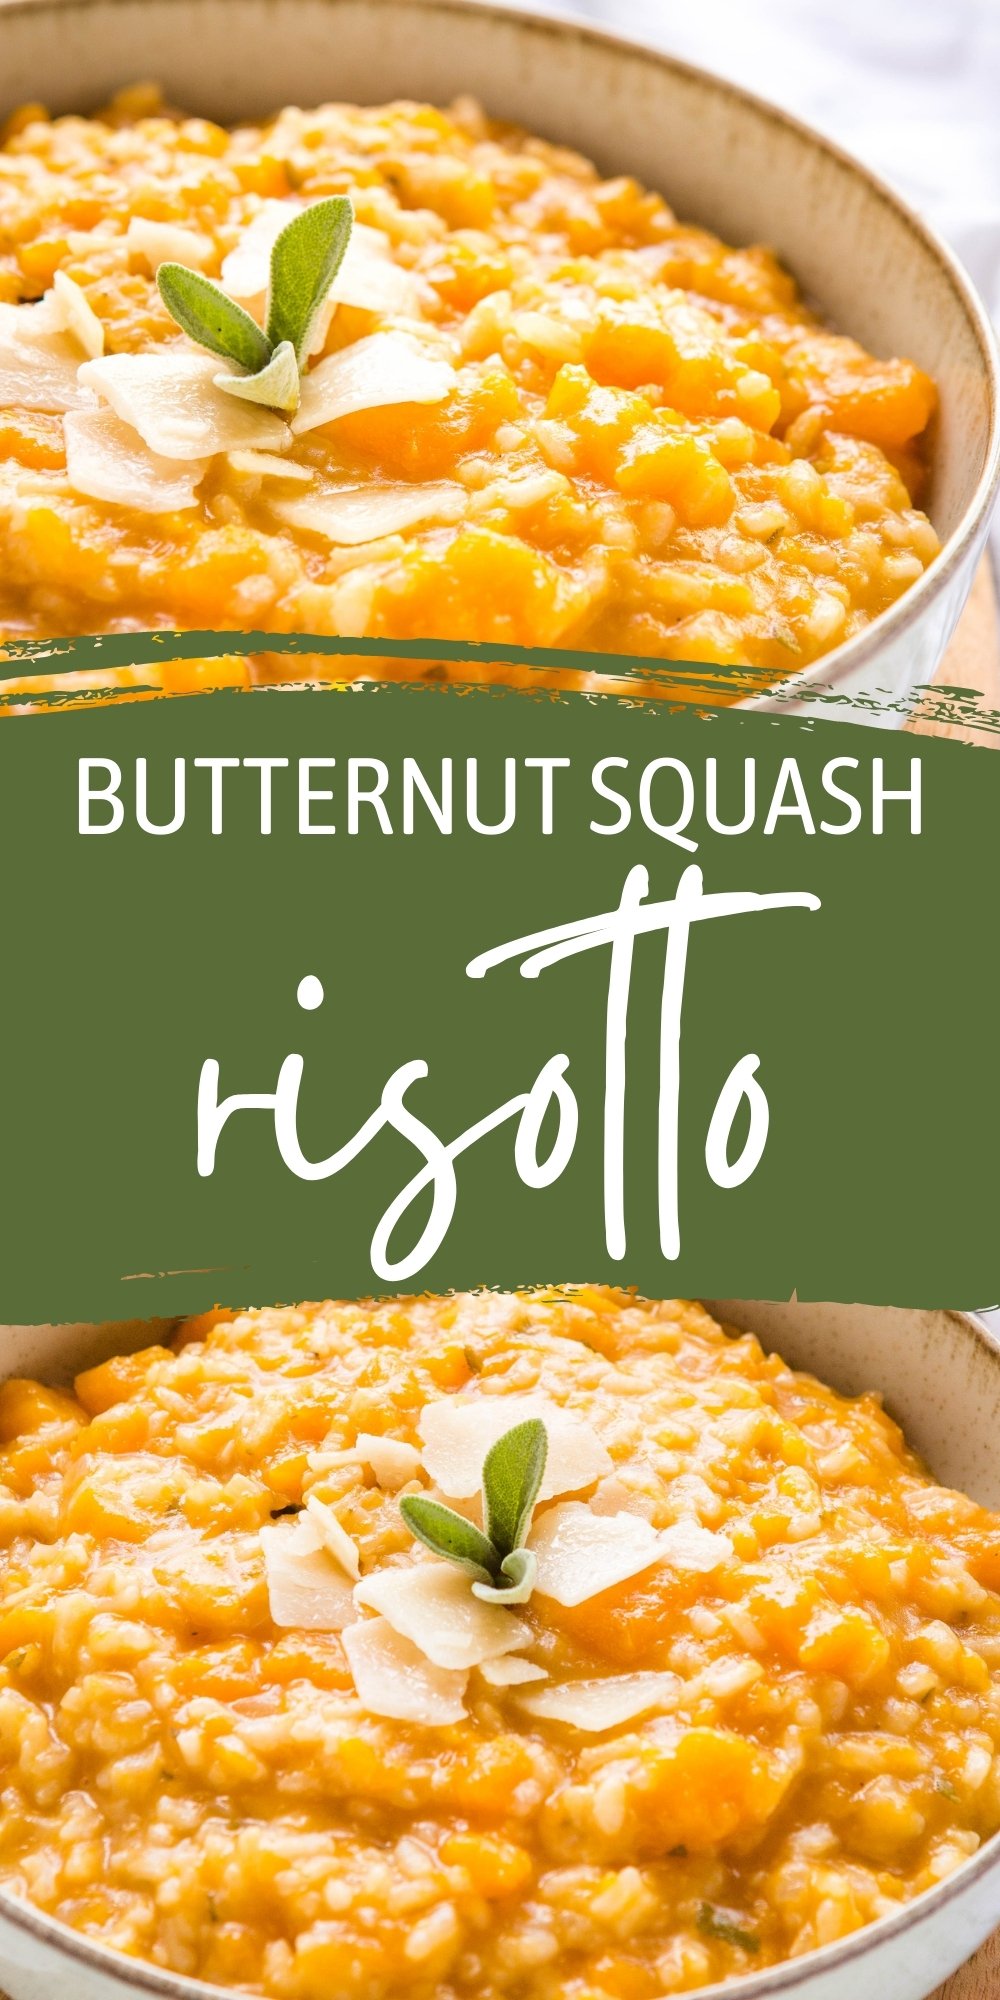 This Risotto Alla Zucca is perfectly creamy and delicious, made easy with butternut squash, fresh sage, and freshly grated parmesan cheese! Recipe from thebusybaker.ca! #risotto #butternutsquashrisotto #rosittoallazucca #homemade #restaurantquality #vegetarian via @busybakerblog